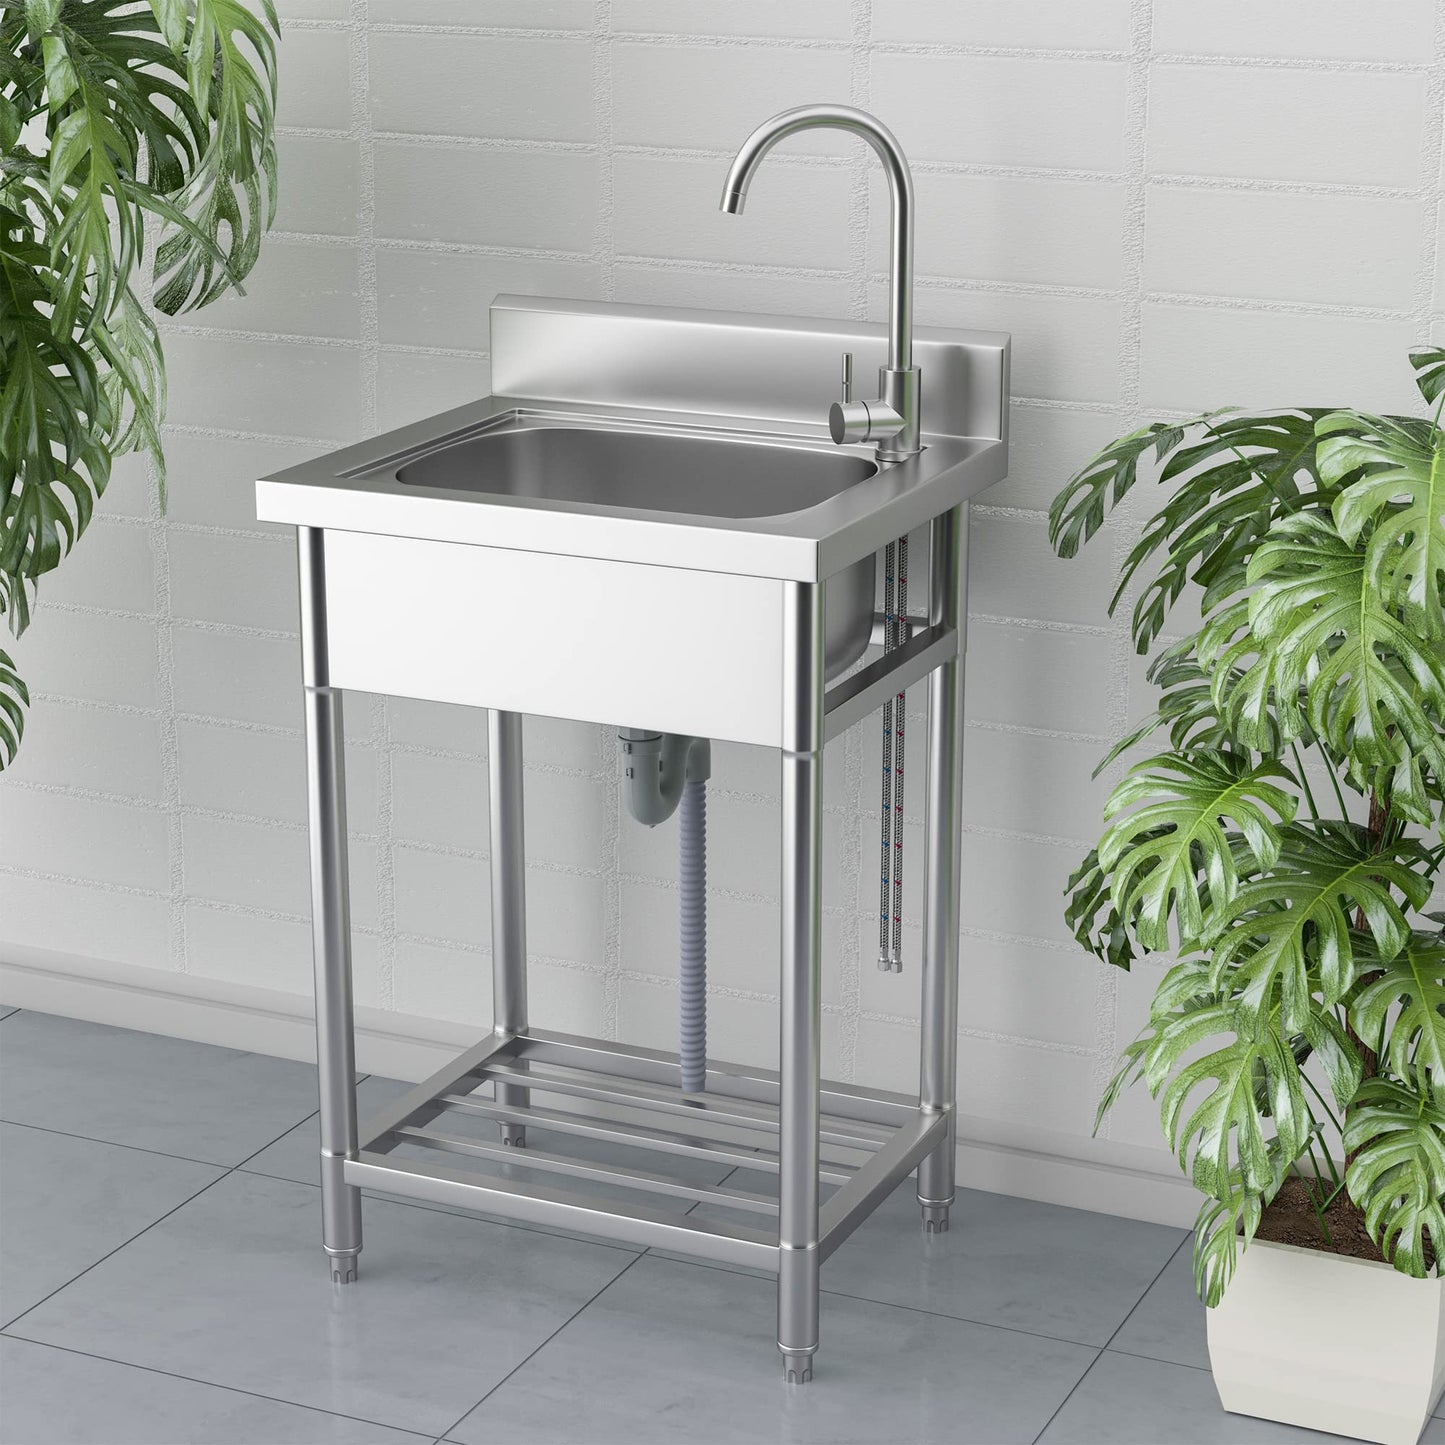 Utility Sink - Stainless Steel Free-Standing Single-Bowl Sink with Hot and Cold Water Pipes for Laundry, Bathroom, and Farmhouse